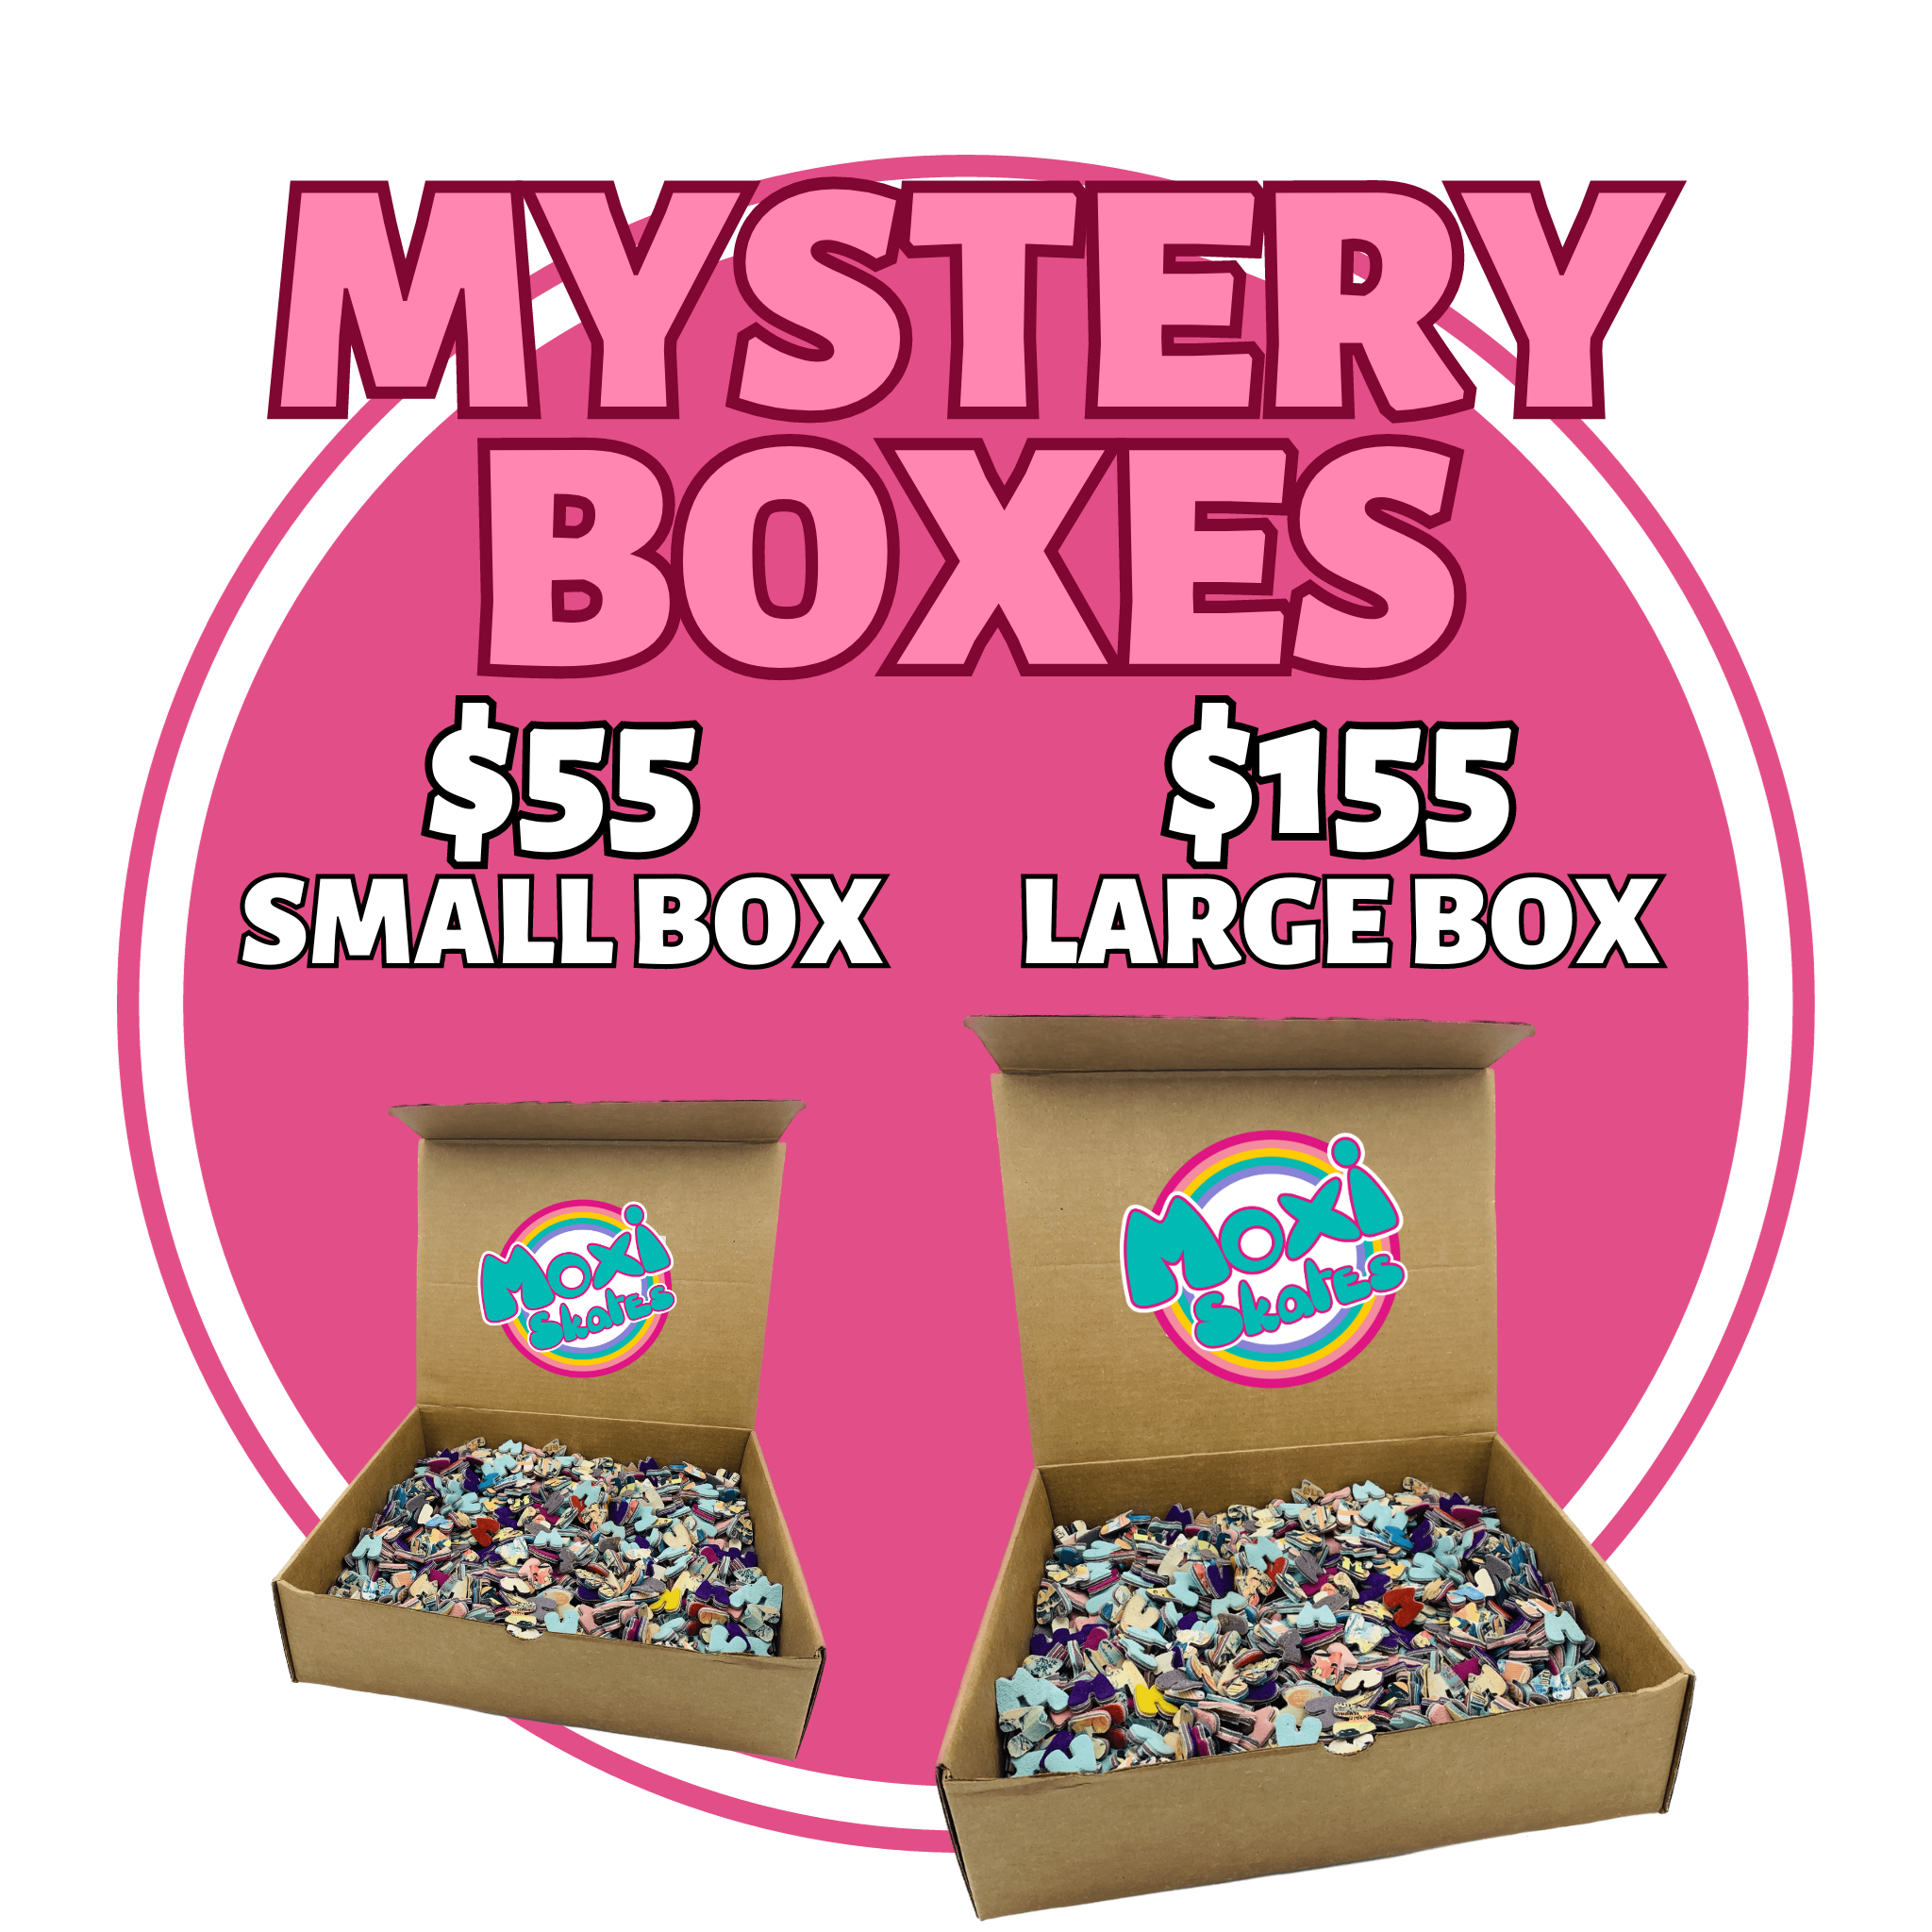 Mystery boxes, $55 for small box, $155 for large box